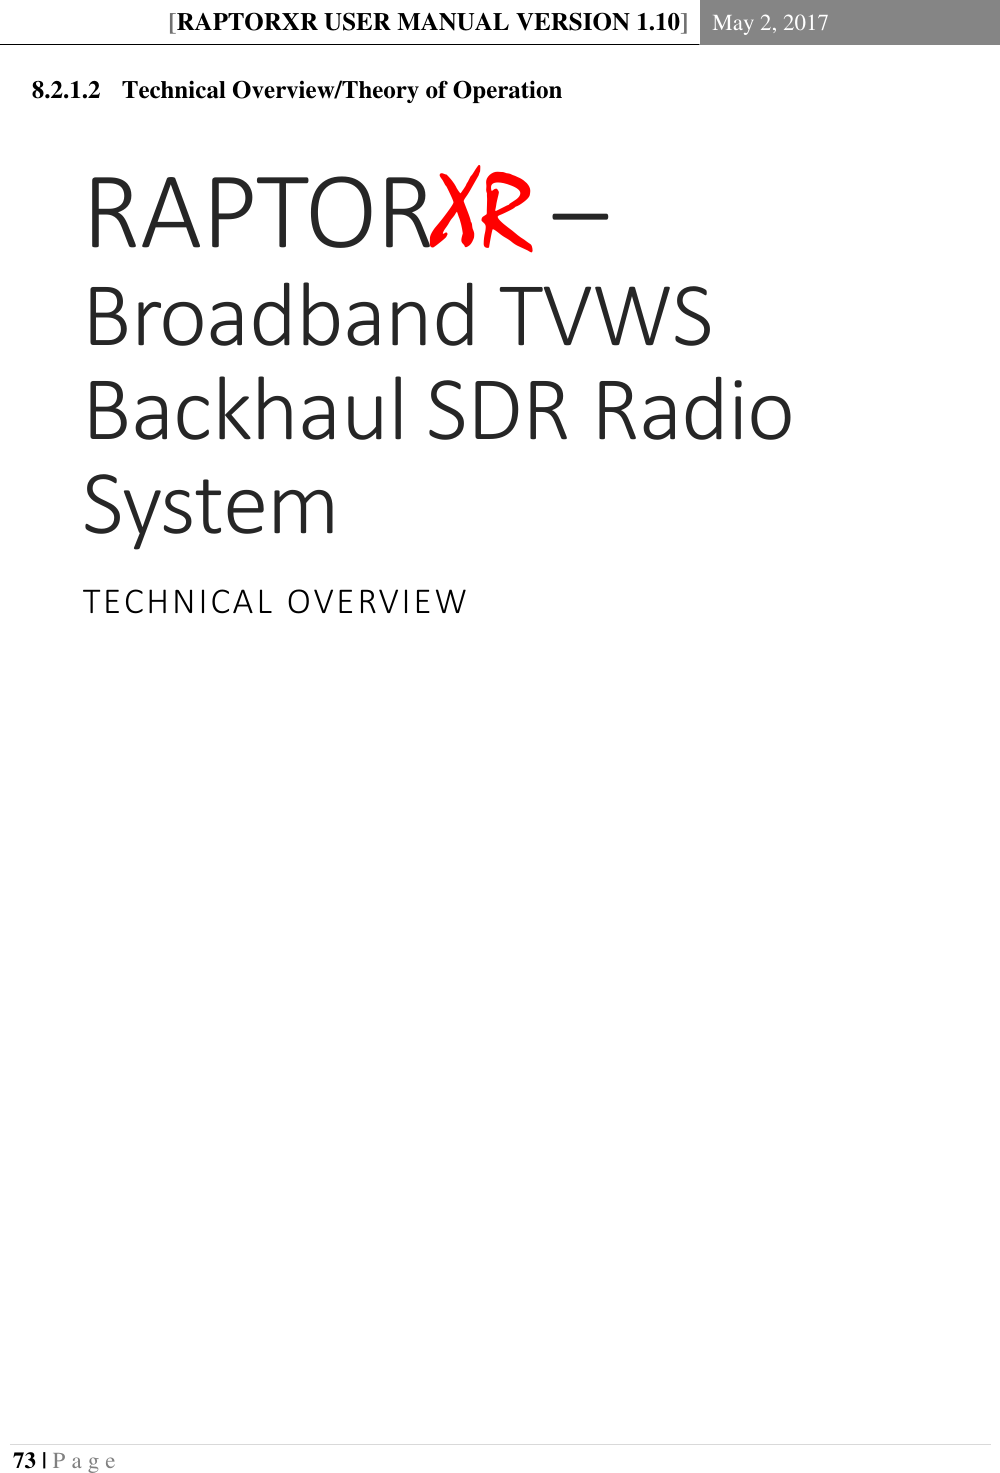 [RAPTORXR USER MANUAL VERSION 1.10] May 2, 2017  73 | P a g e   8.2.1.2 Technical Overview/Theory of Operation RAPTORXR –Broadband TVWS Backhaul SDR Radio SystemTECHNICAL OVERVIEW      